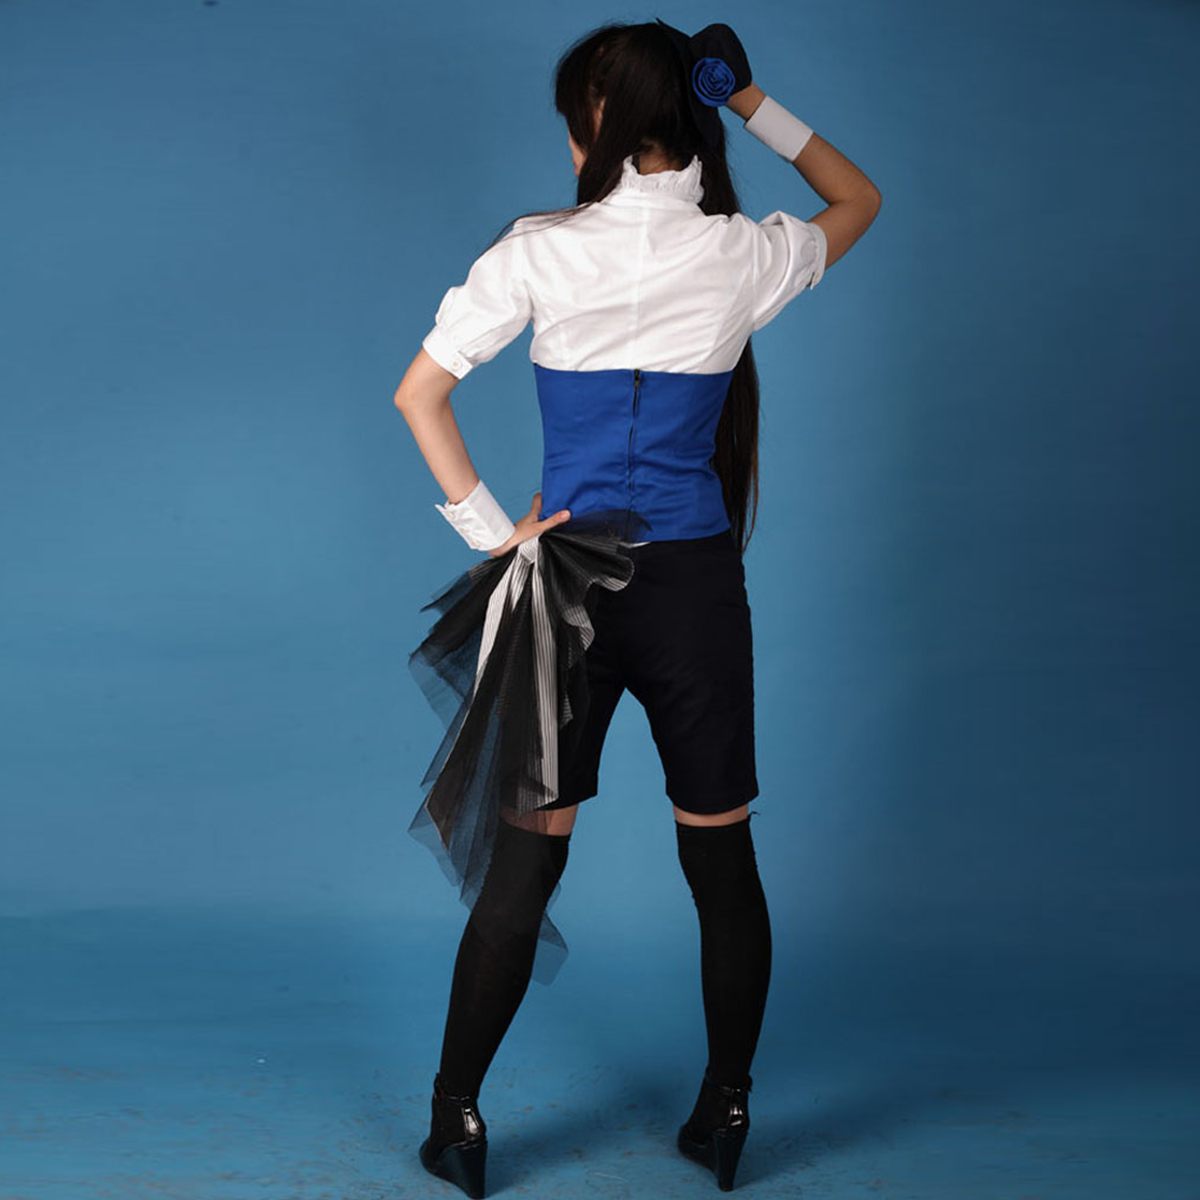 Black Butler Ciel Phantomhive 3 Anime Cosplay Costumes Outfit